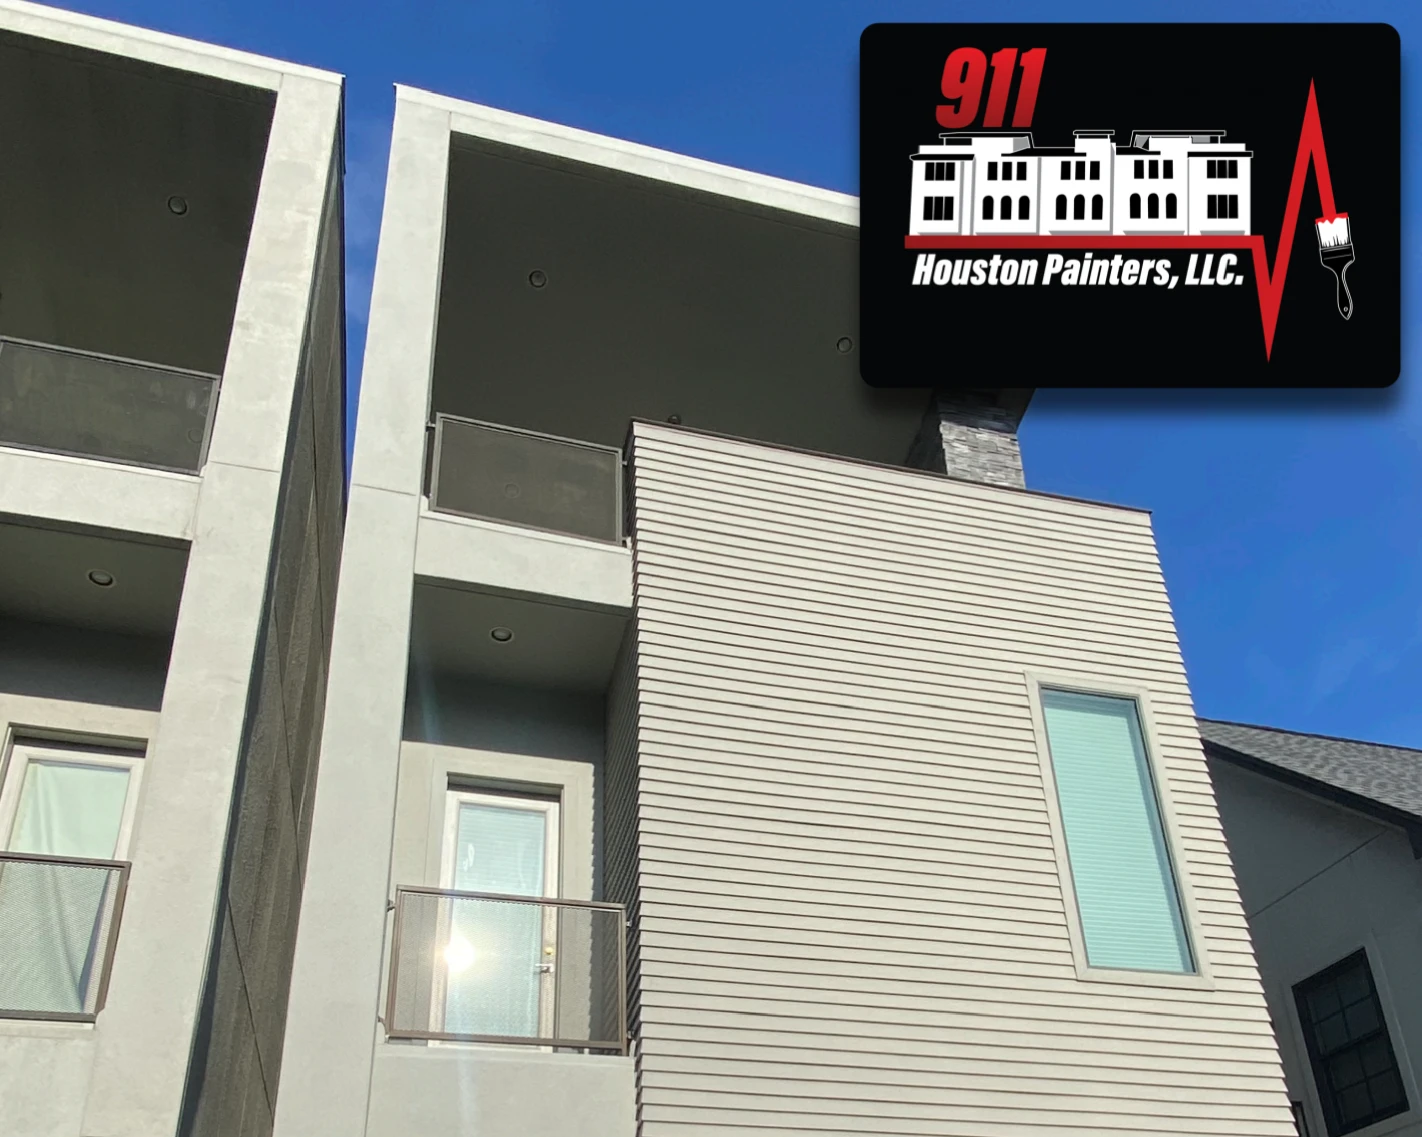 Exterior House Painting for 911 Houston Painters, LLC in Houston, TX